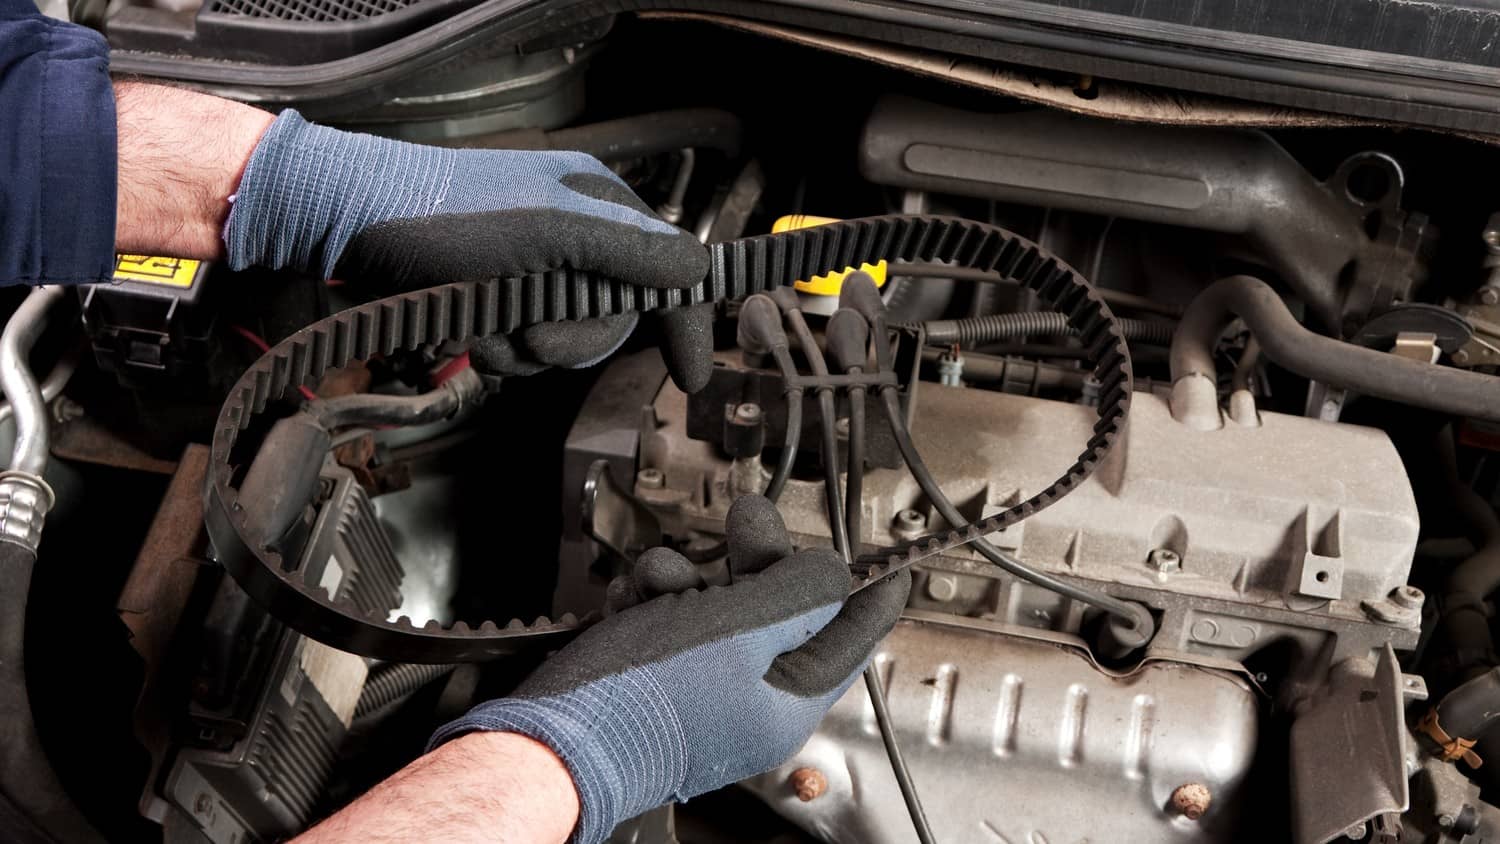 A mechanic working on a car engine, replacing the timing belt.